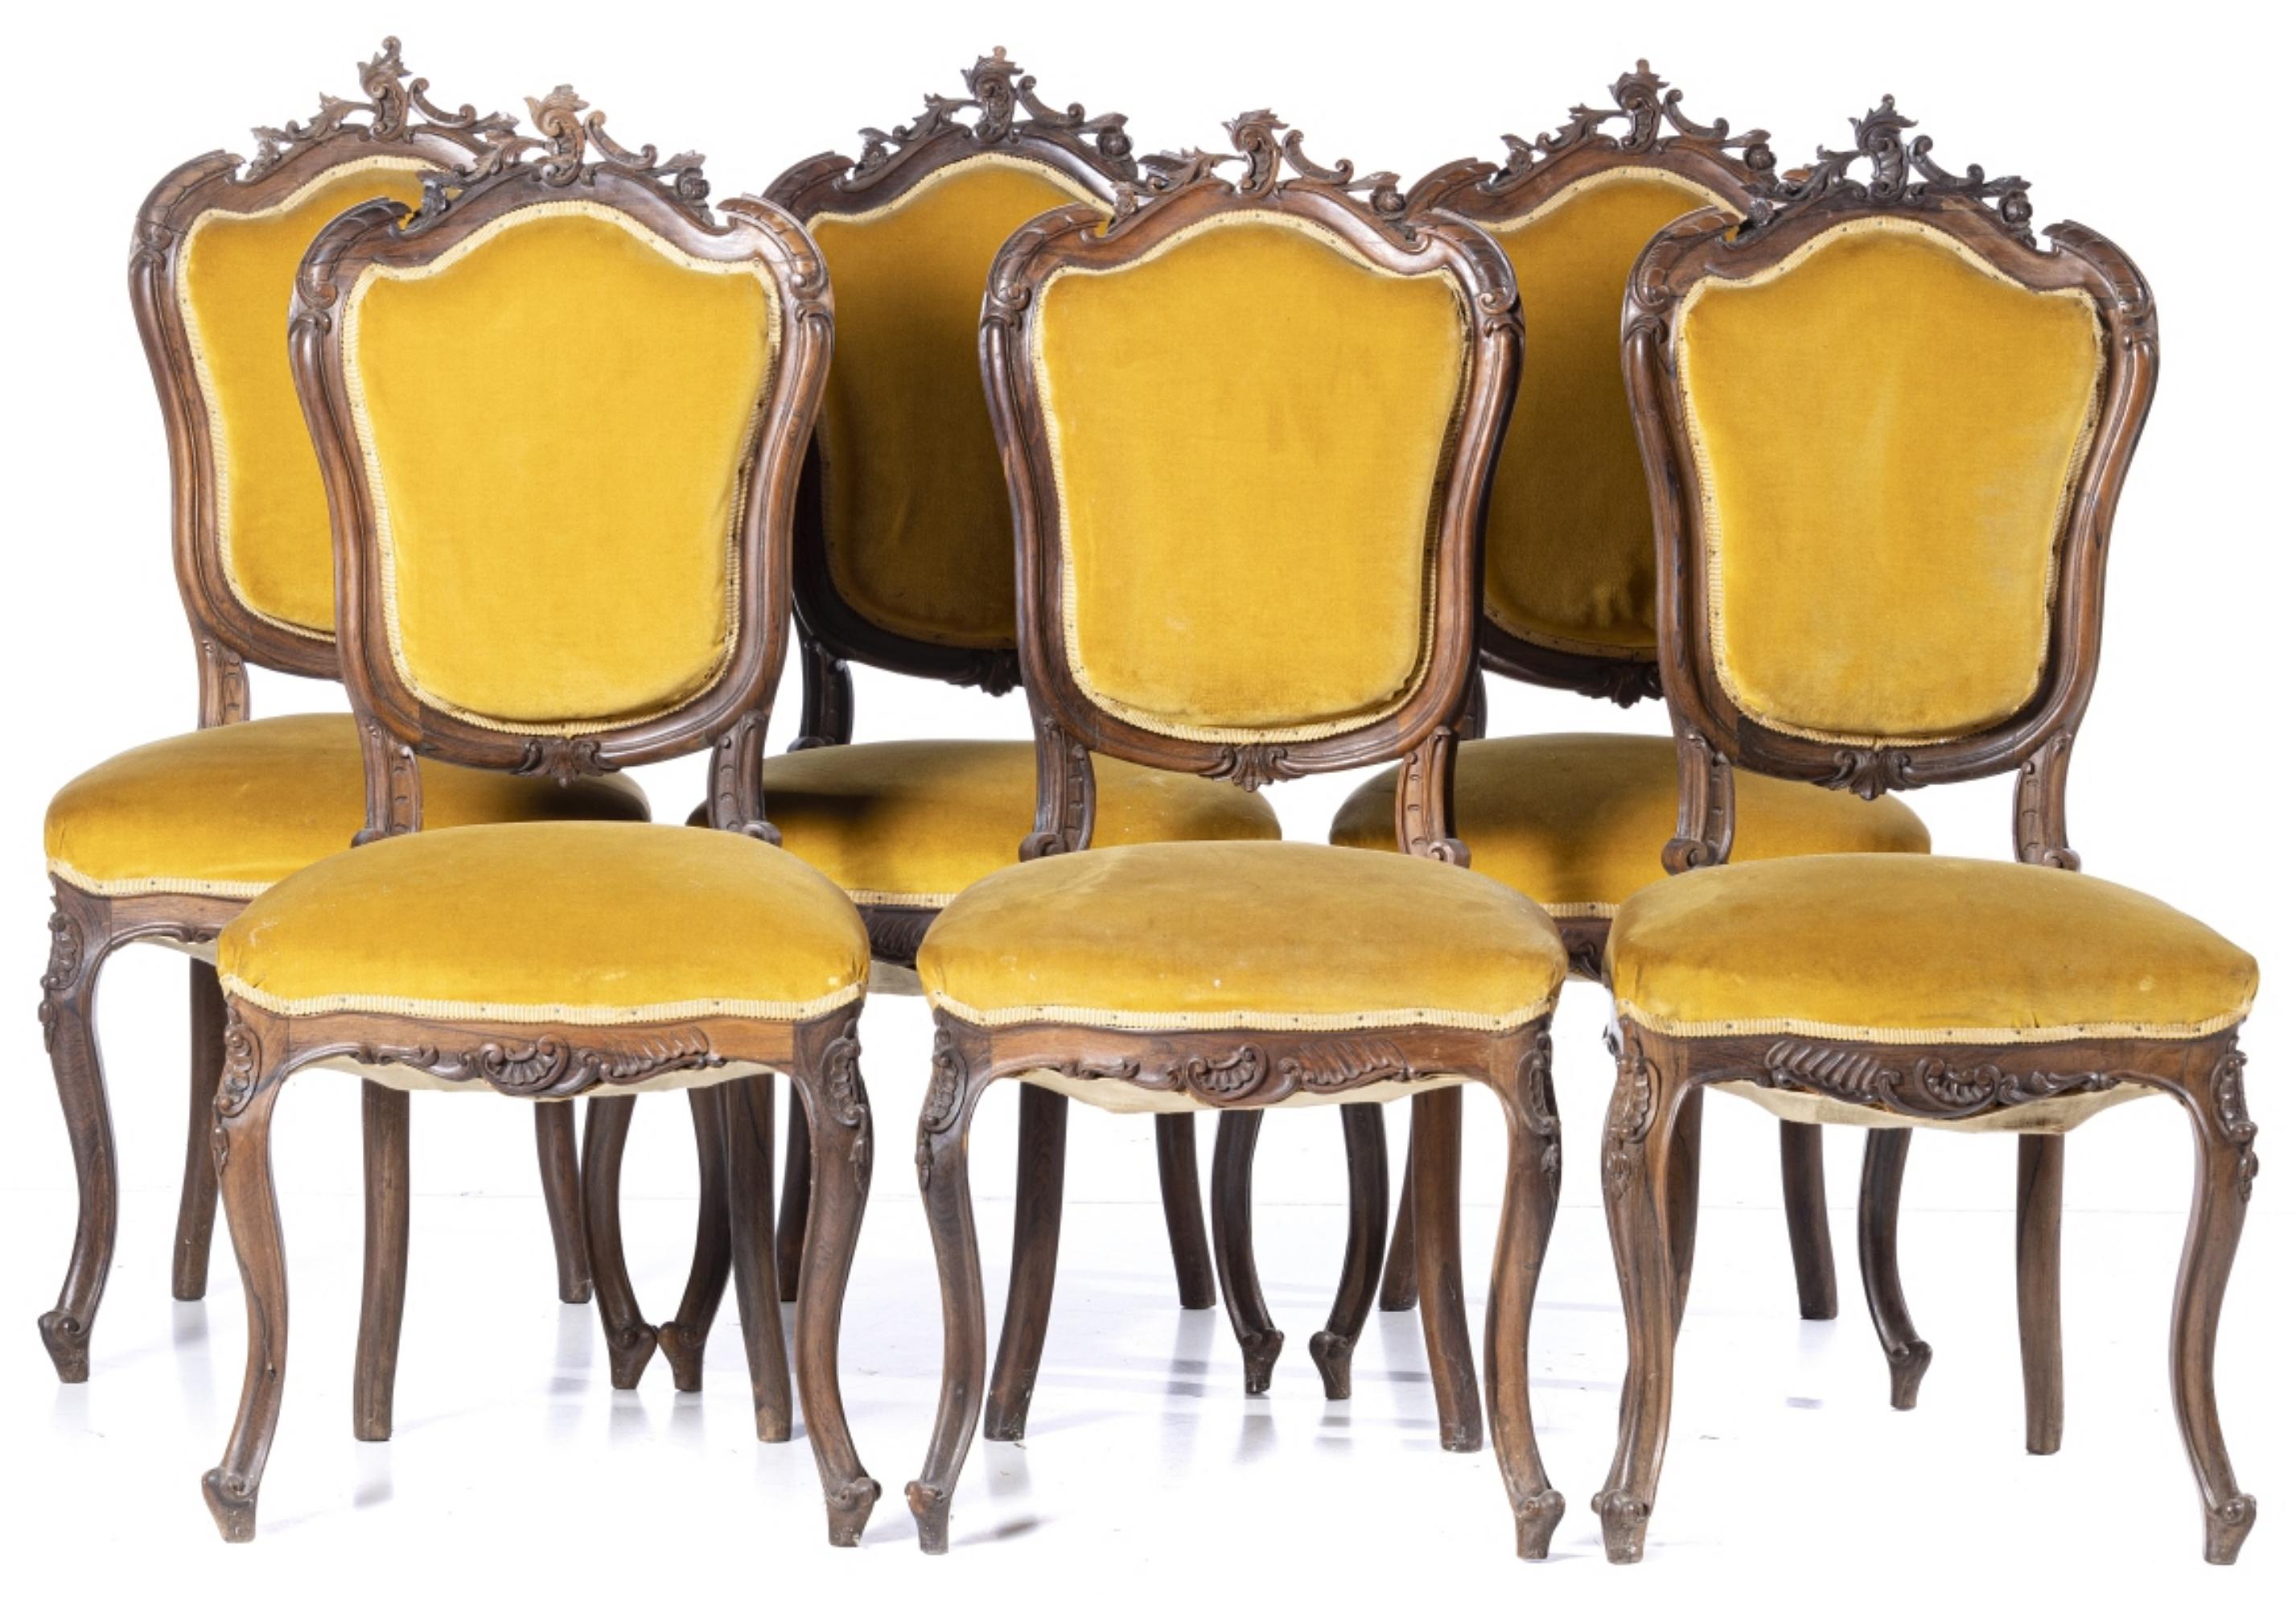 SET OF SIX LUIS XVI PORTUGUESE CHAIRS 19th Century

Portuguese, 19th century
in rosewood wood with carvings. 
Upholstered backs and seats. 
Small defects. 
Dim.: 98 x 47 x 42 cm
good conditions